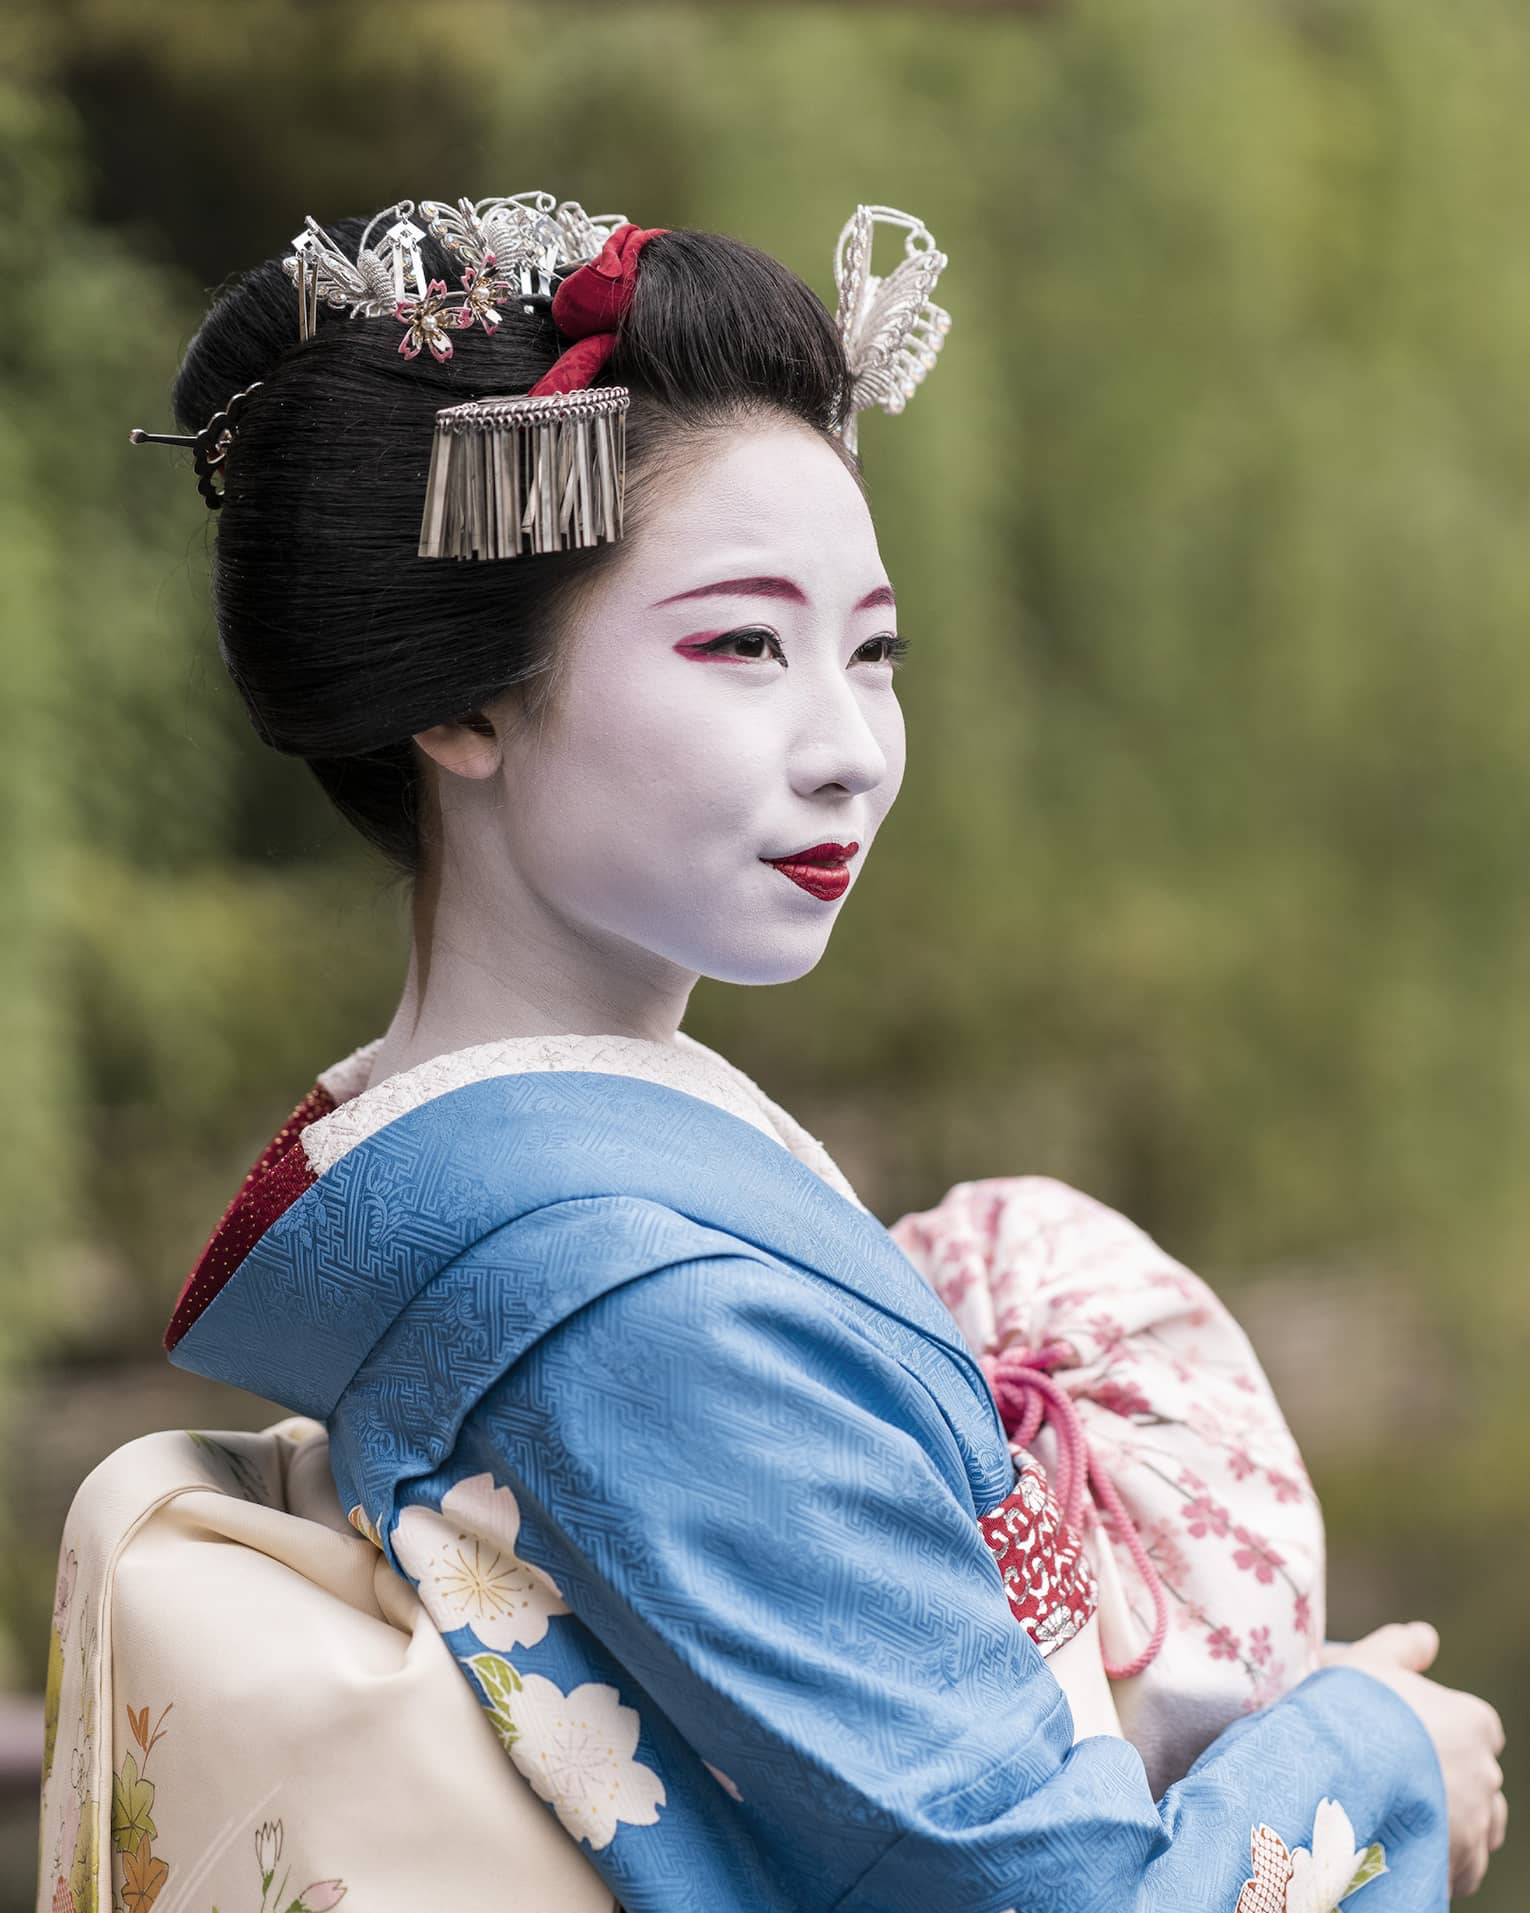 Woman dressed as traditional maiko (apprentice geisha) outdoors in the garden